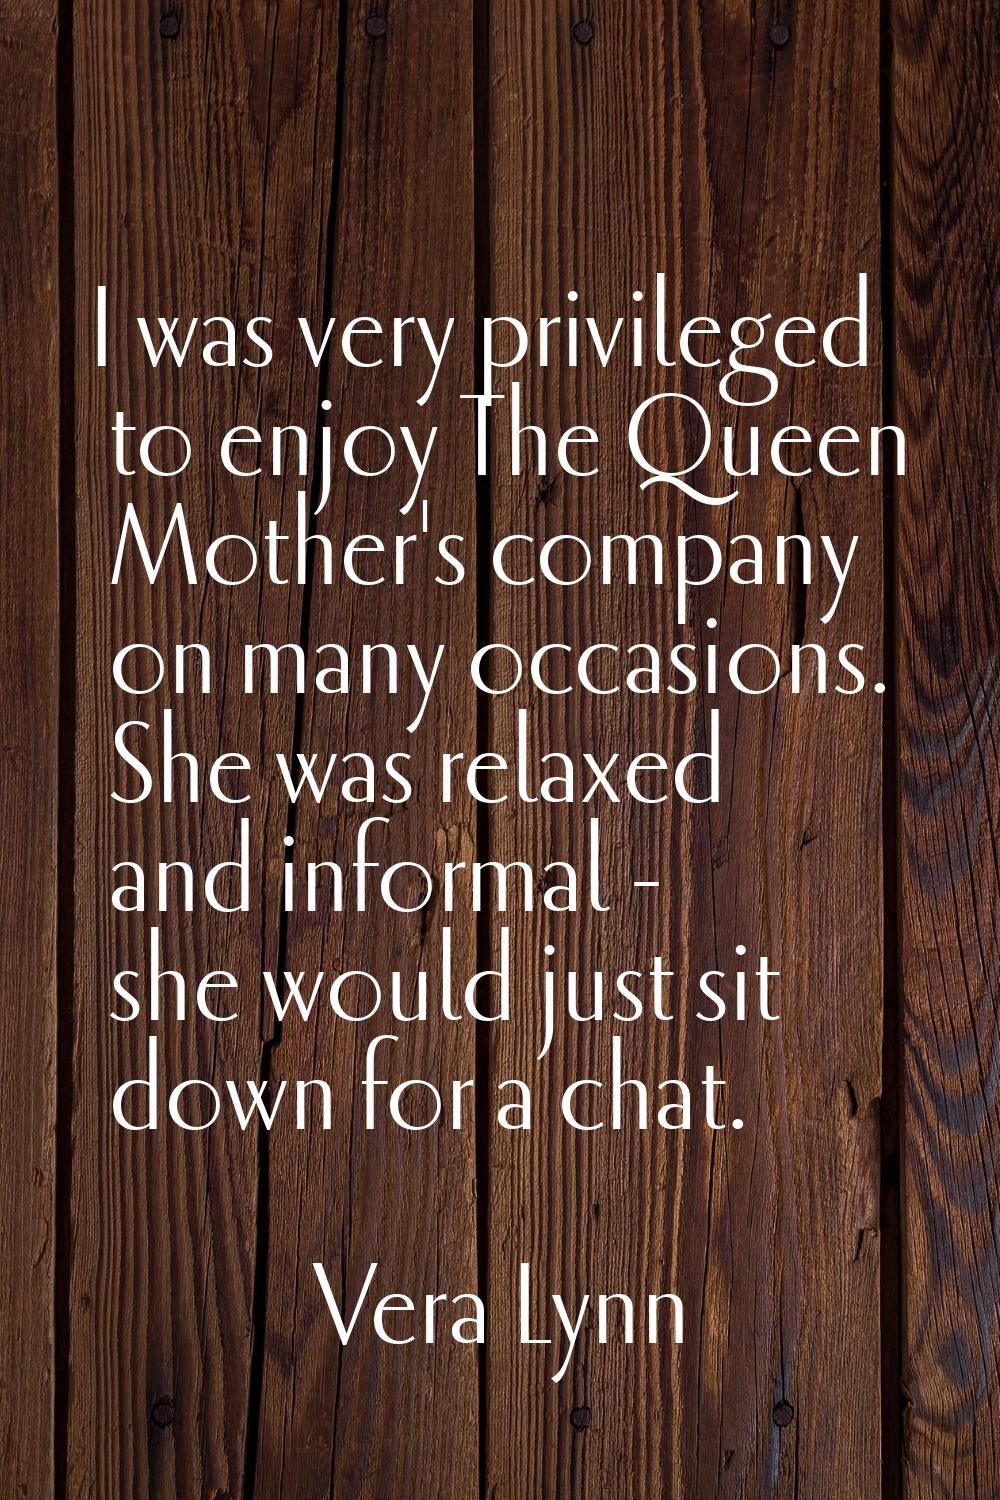 I was very privileged to enjoy The Queen Mother's company on many occasions. She was relaxed and in